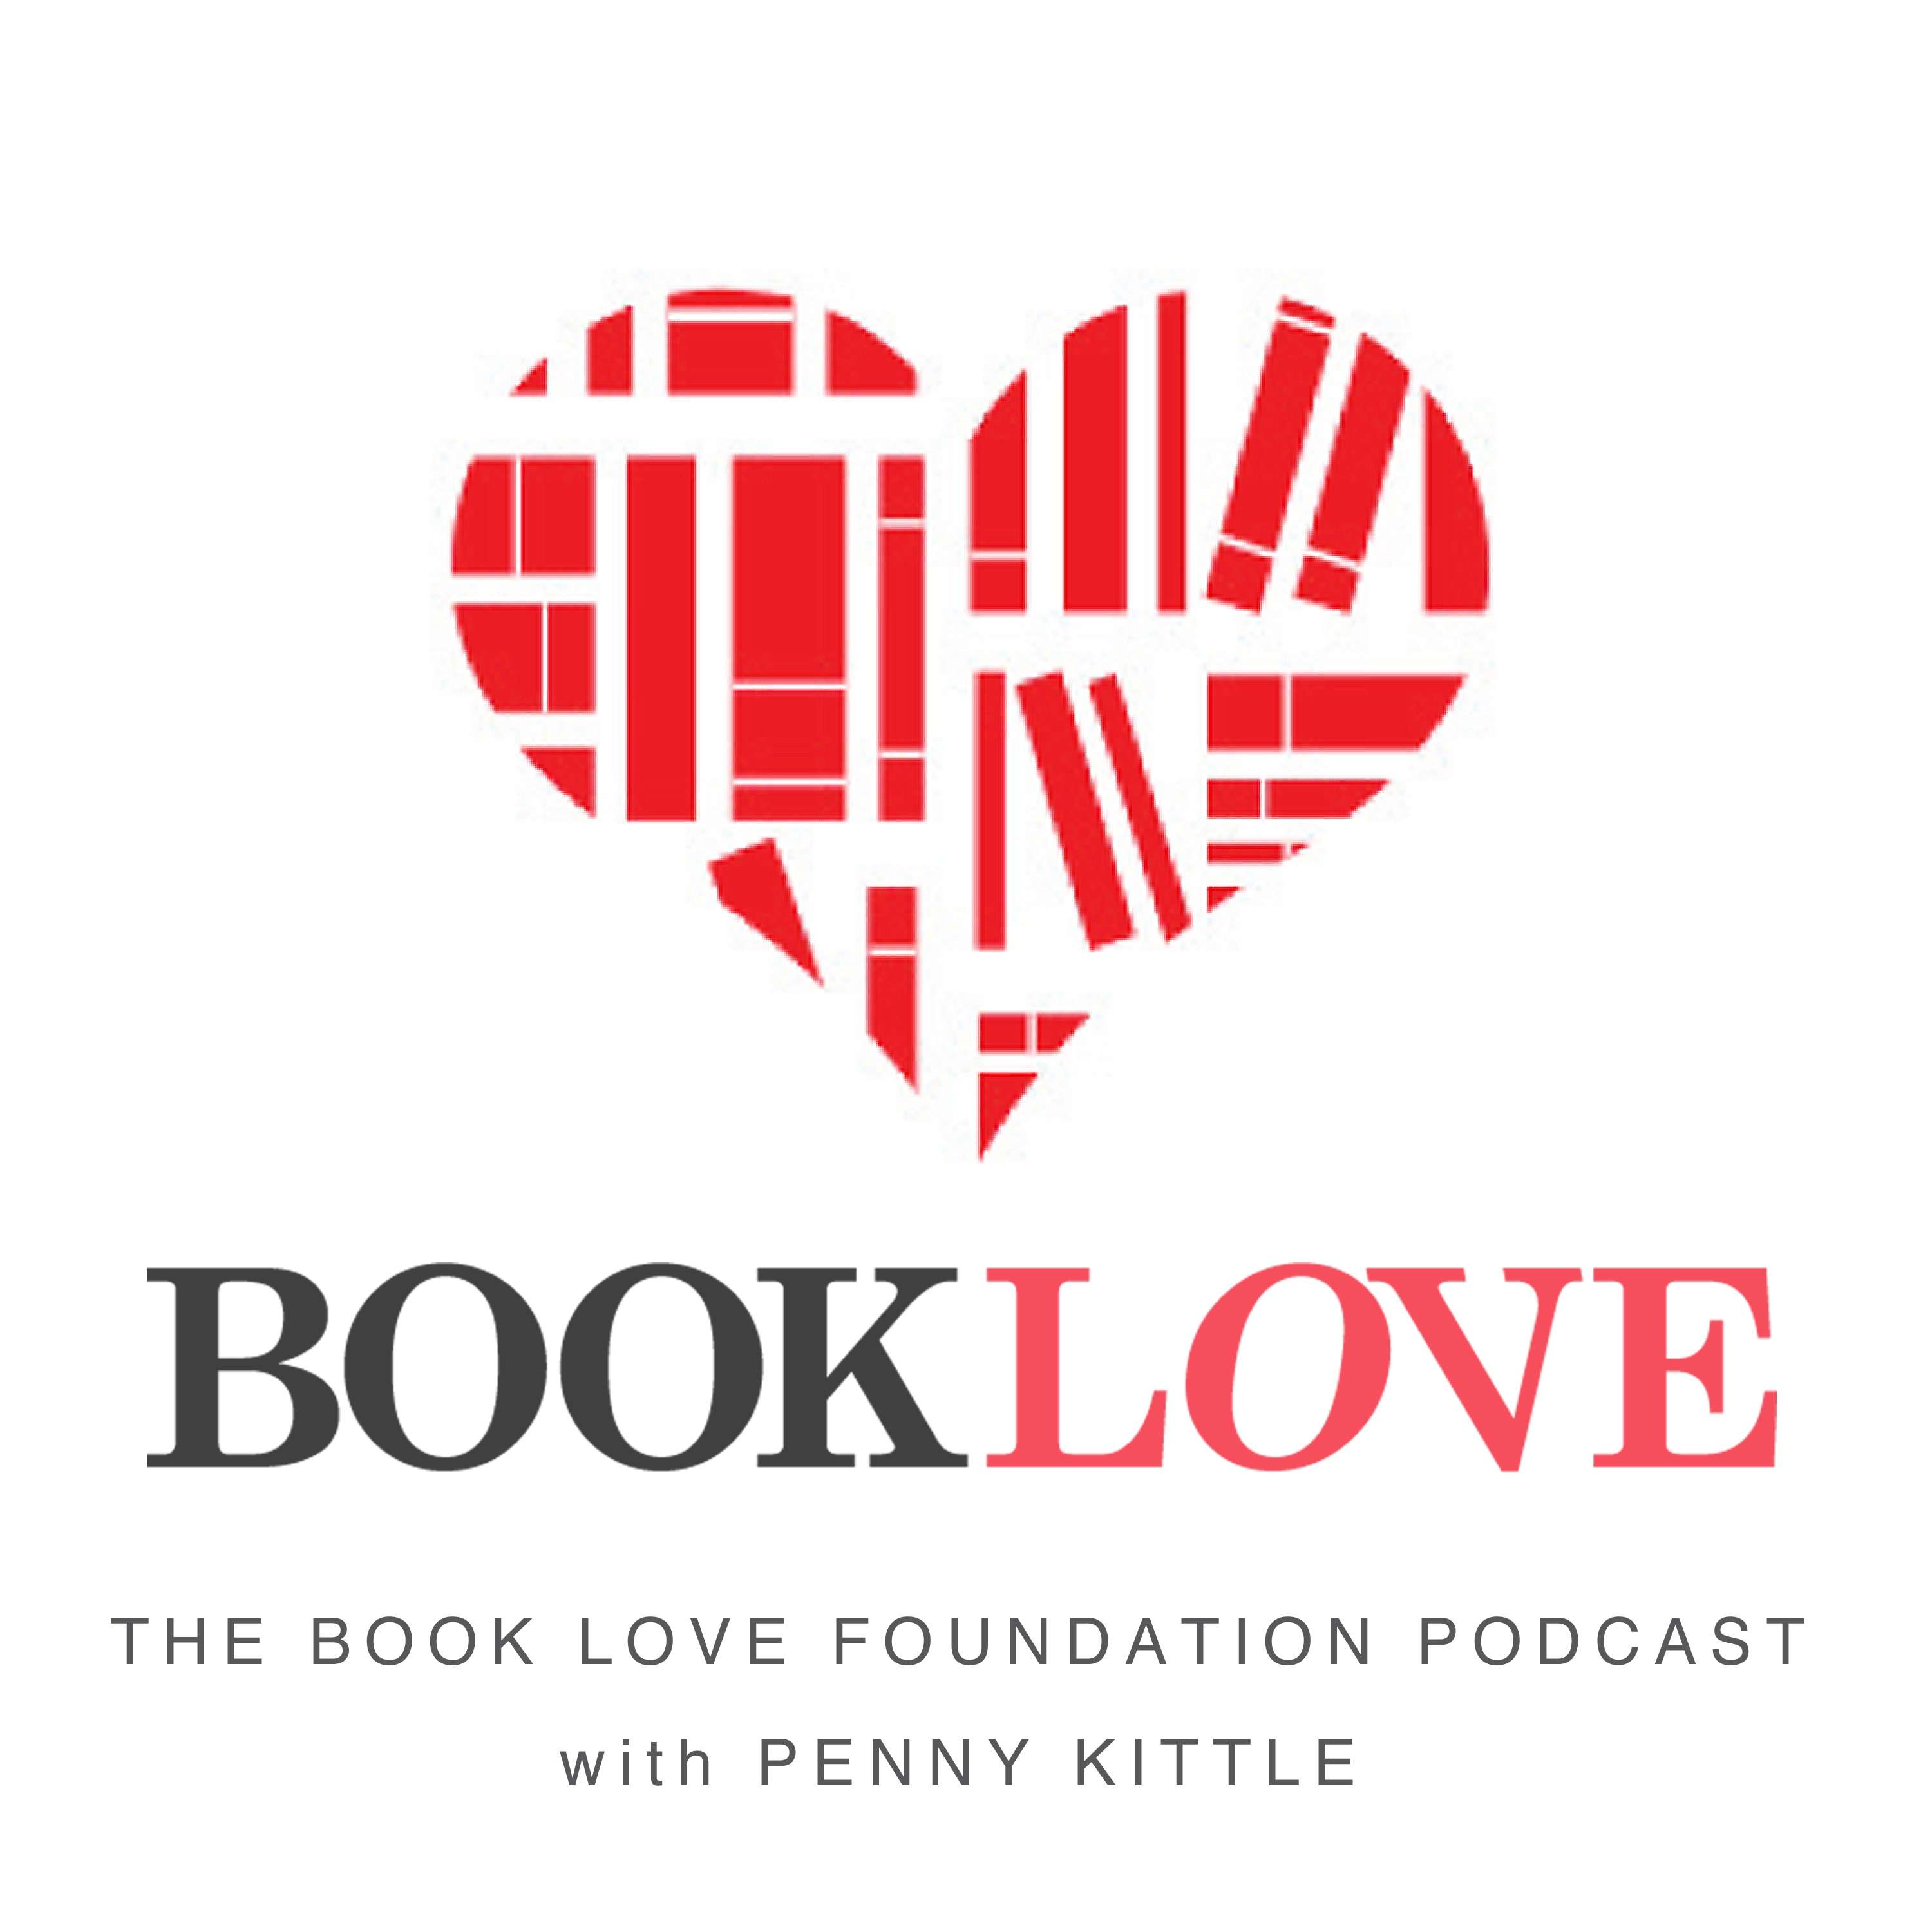 A Conversation with John Irving, Part 1. Season 2 Ep. 11 of the Book Love Foundation Podcast